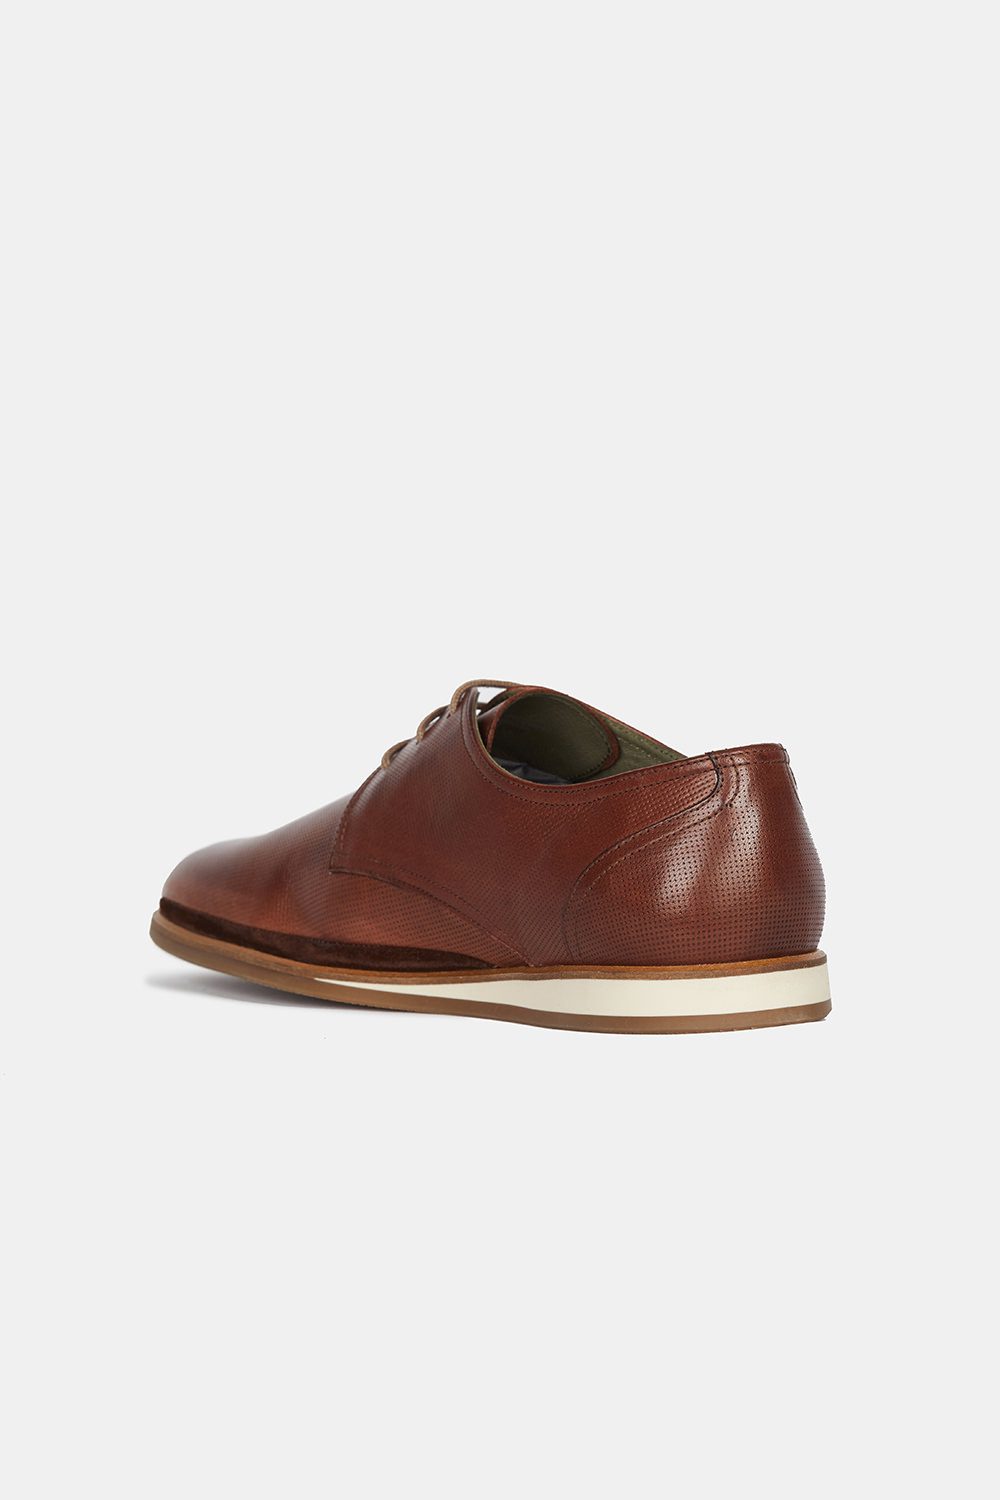 Basic Shoe With Contrast Sole